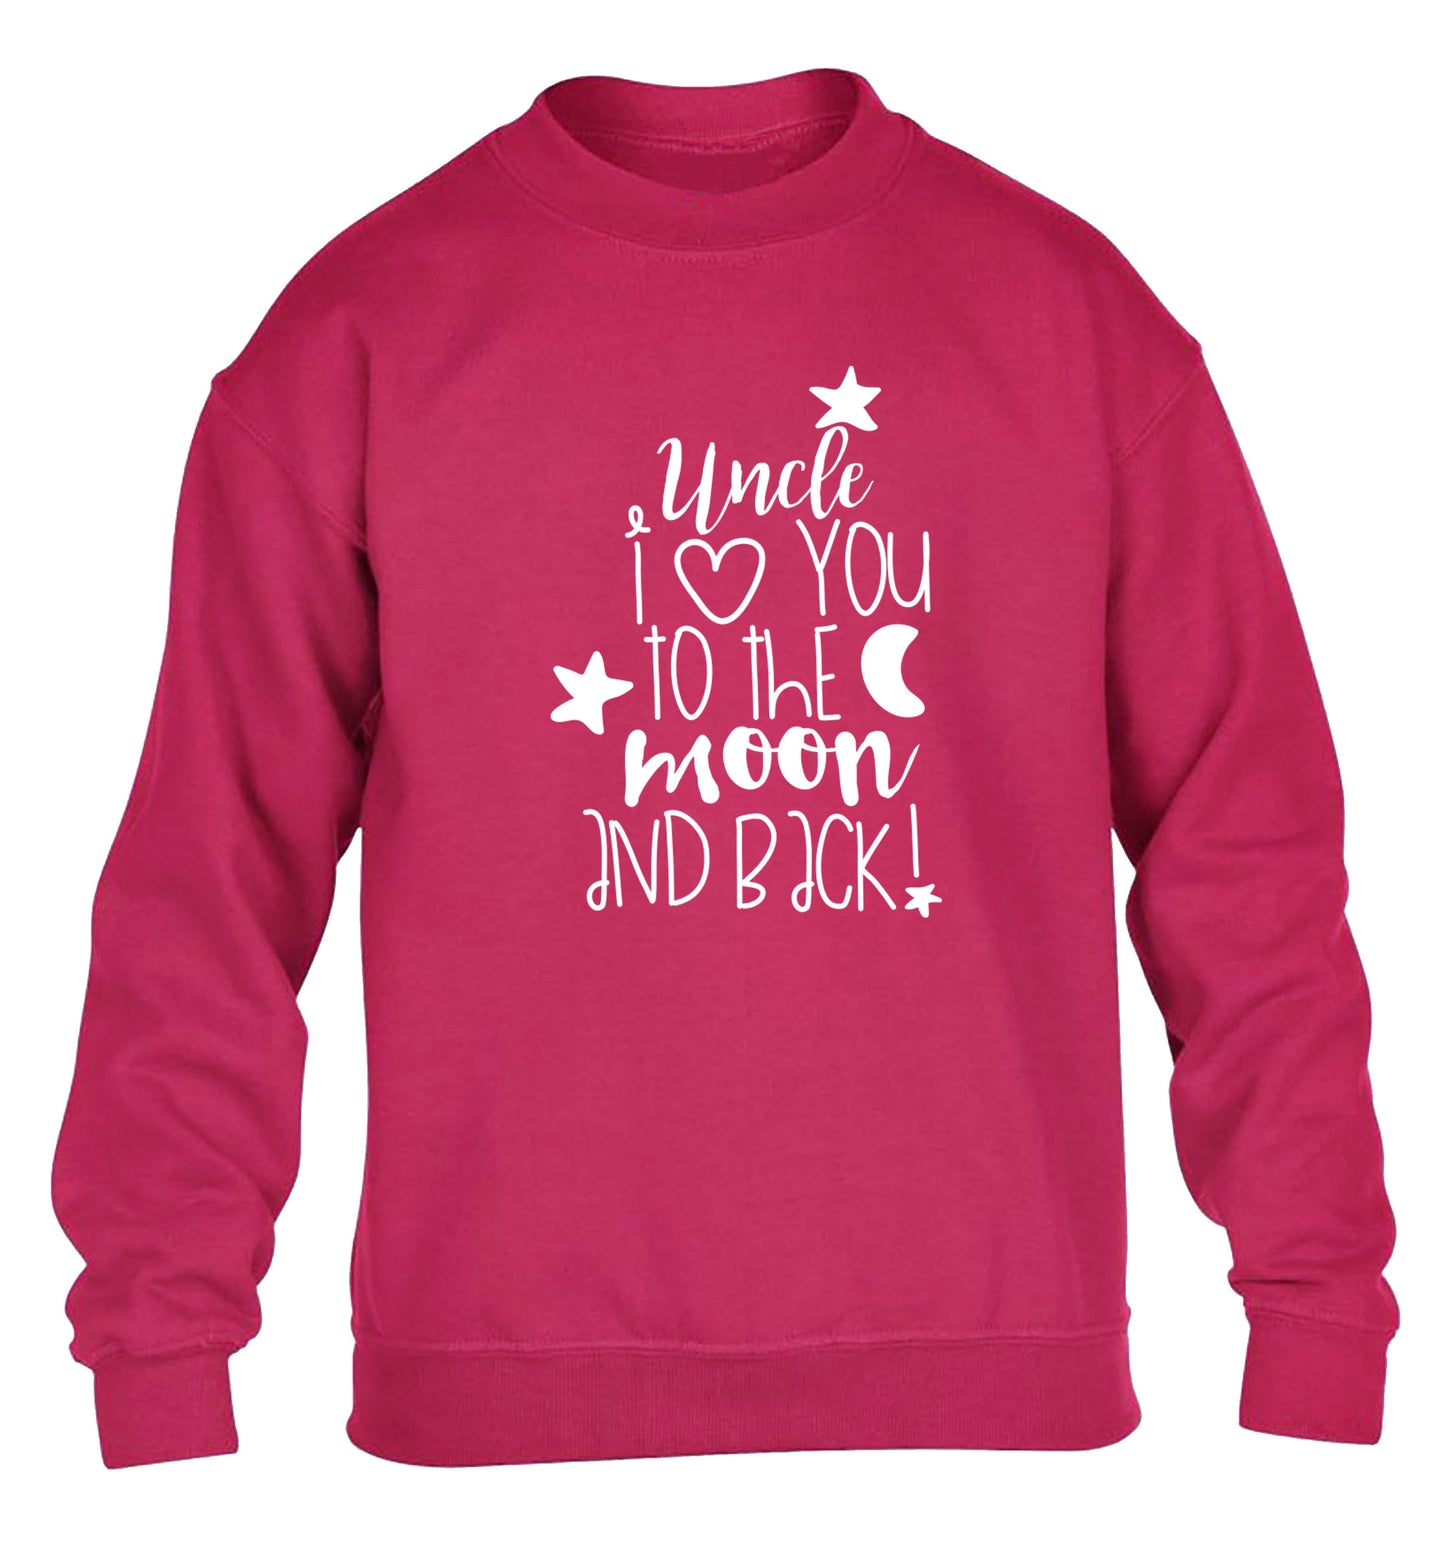 Uncle I love you to the moon and back children's pink  sweater 12-14 Years